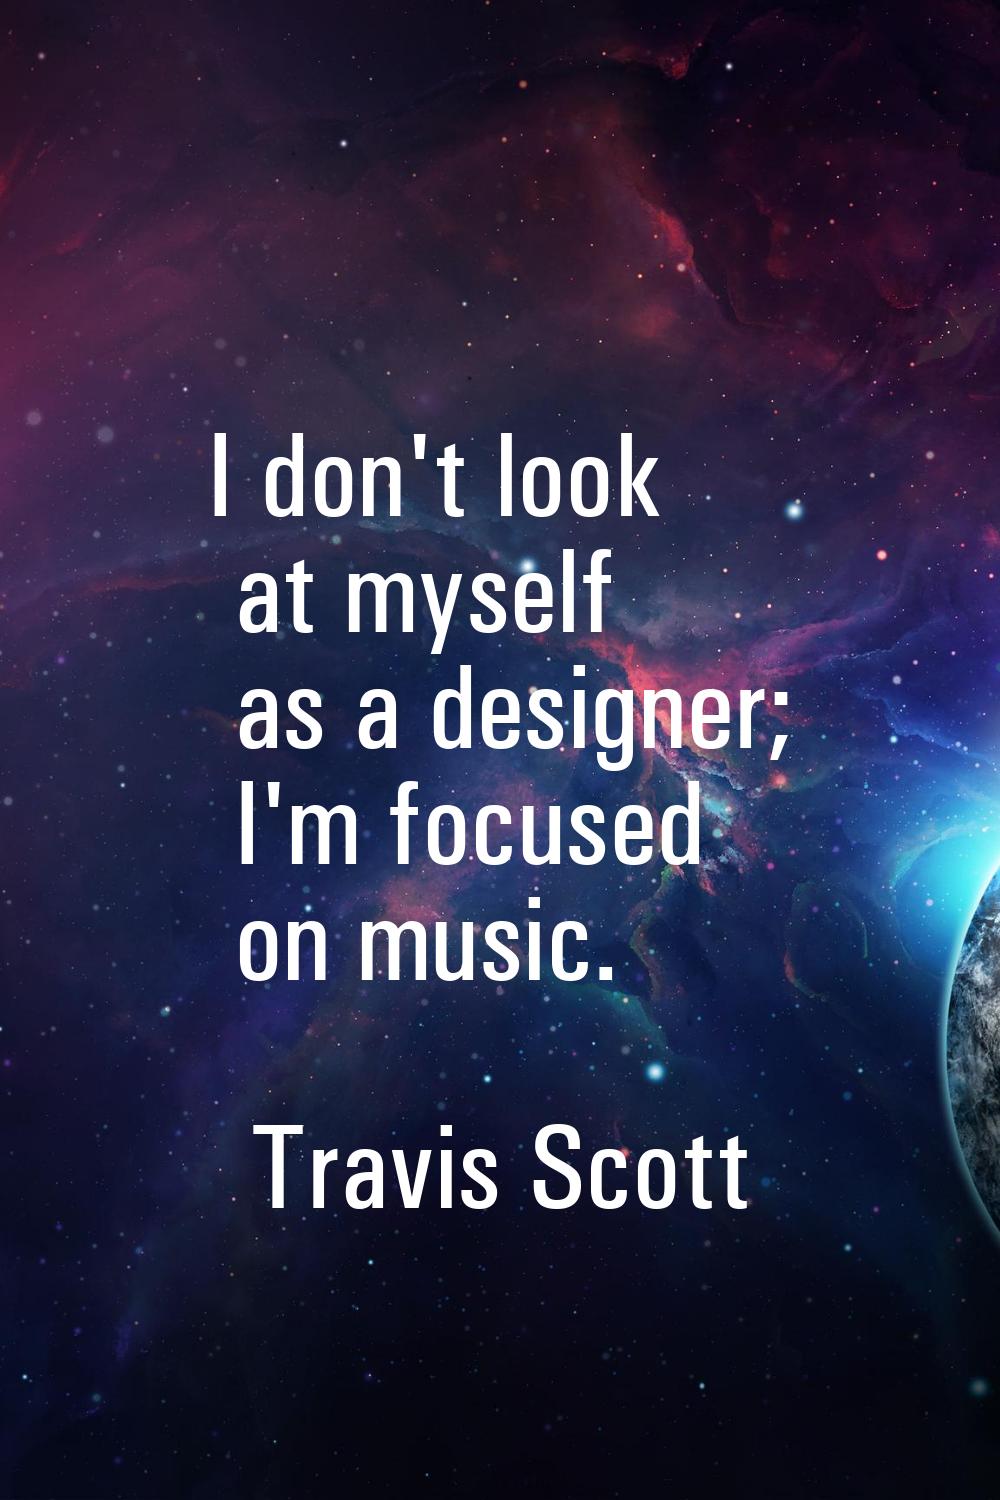 I don't look at myself as a designer; I'm focused on music.